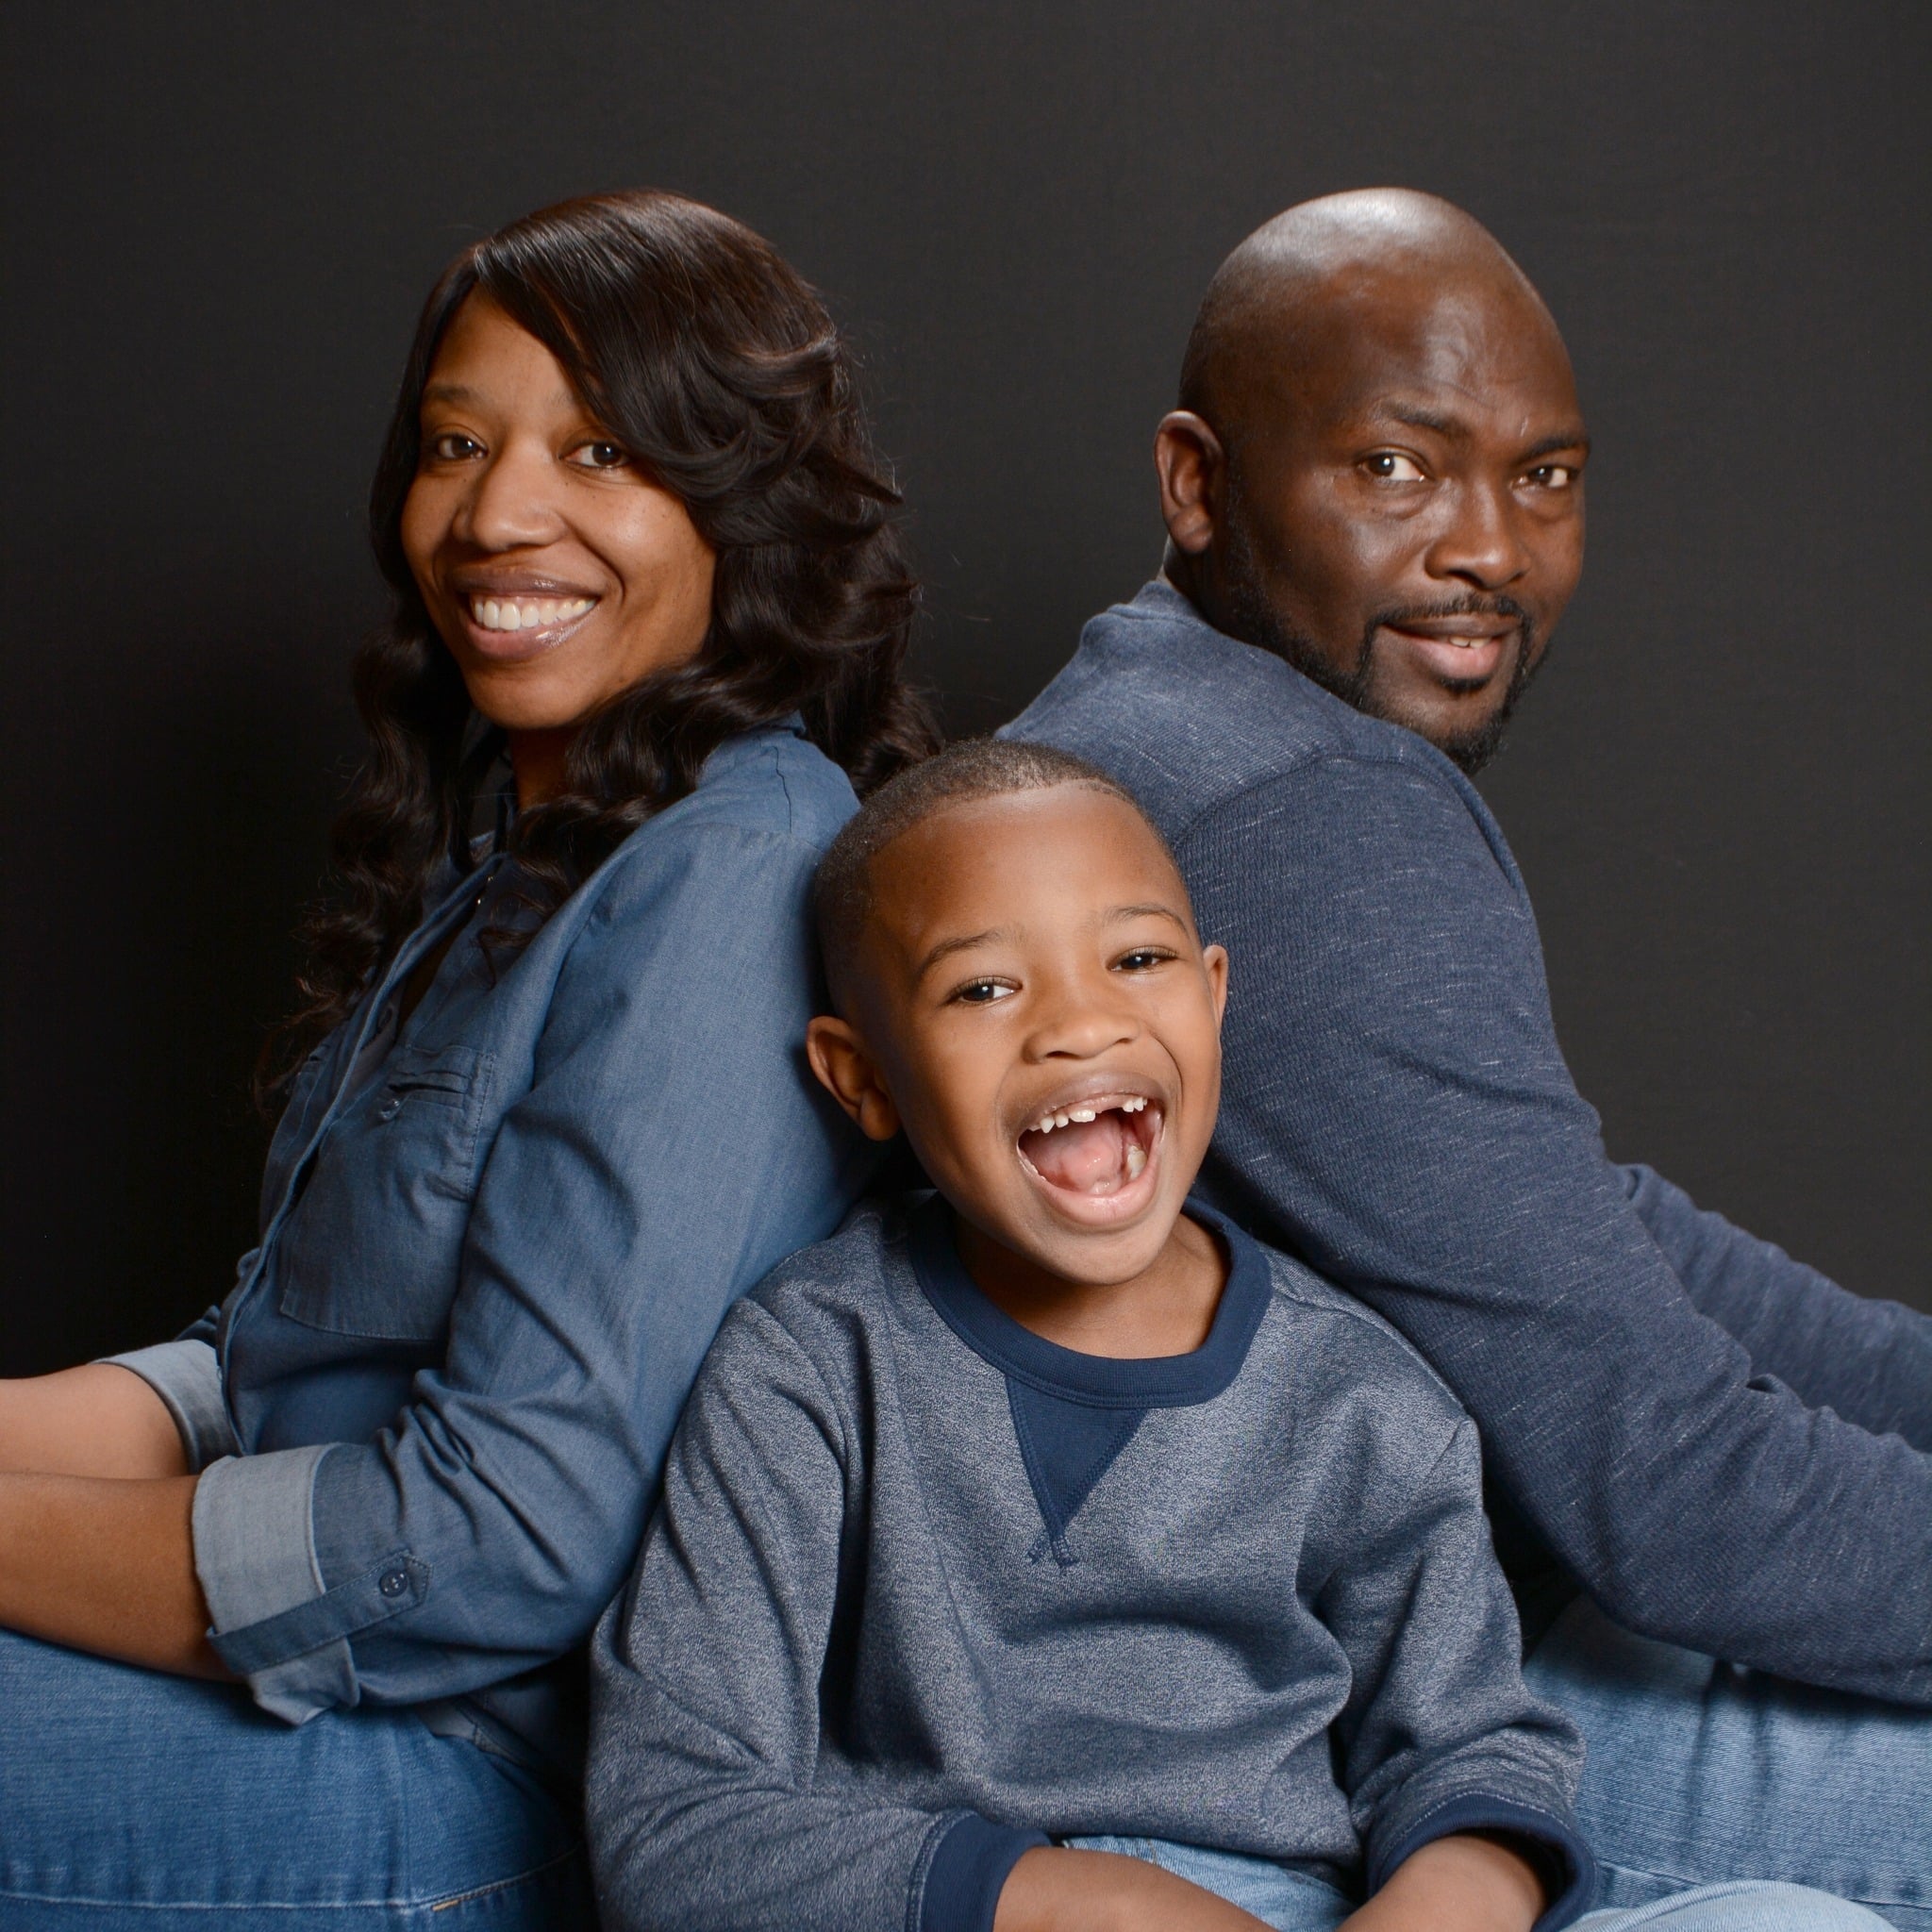 Melton S. Bell and his family, wife Shawnte and Melton S. Bell II